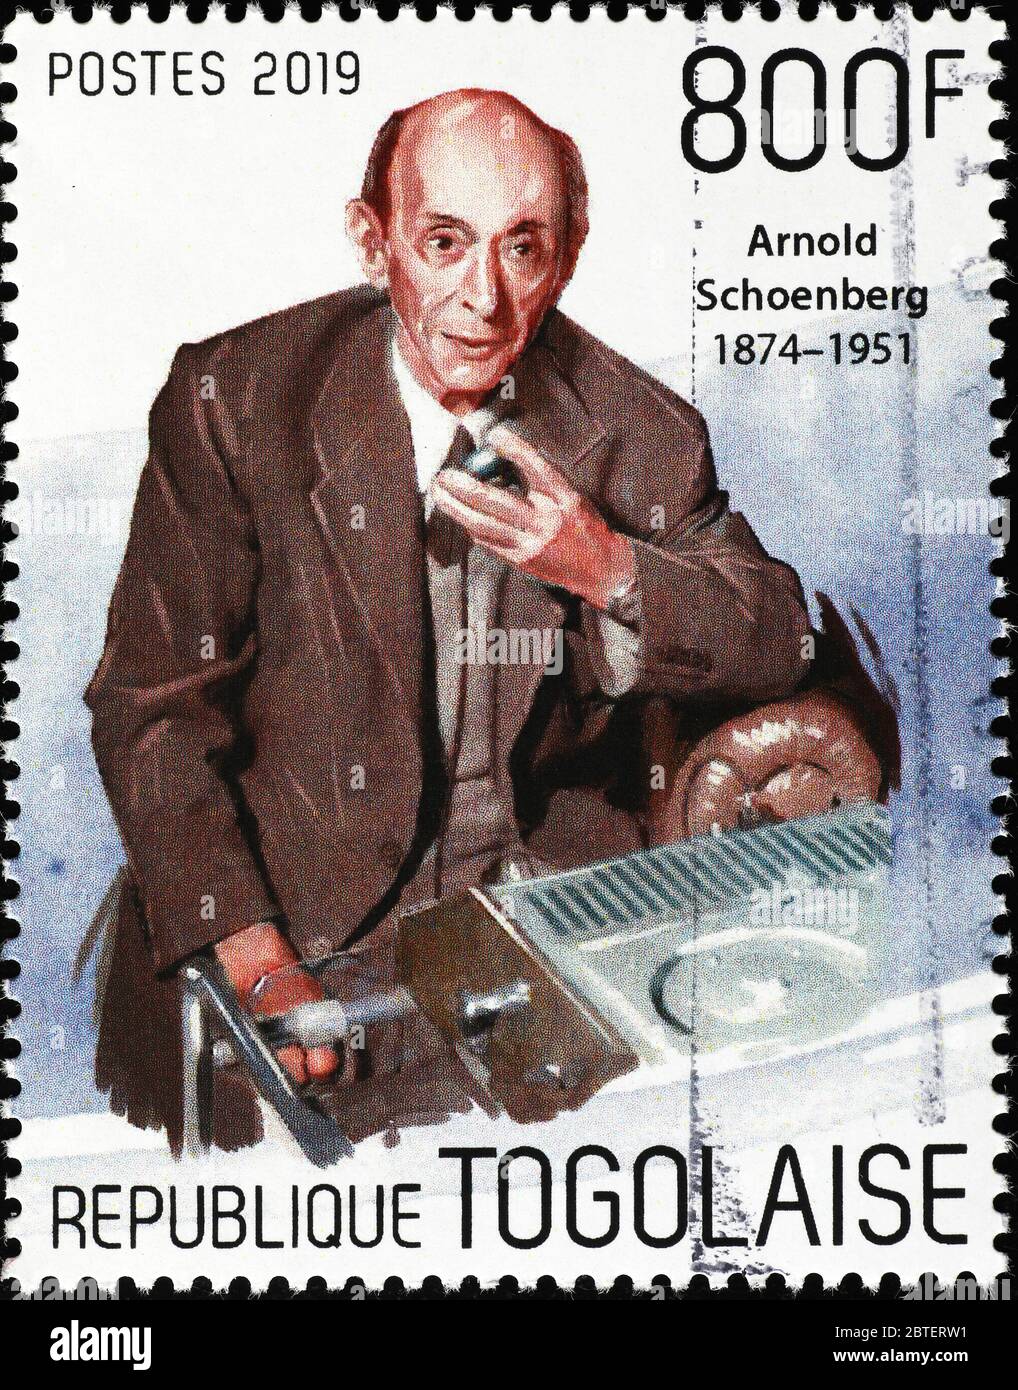 Portrait of composer Arnold Schoenberg on postage stamp Stock Photo